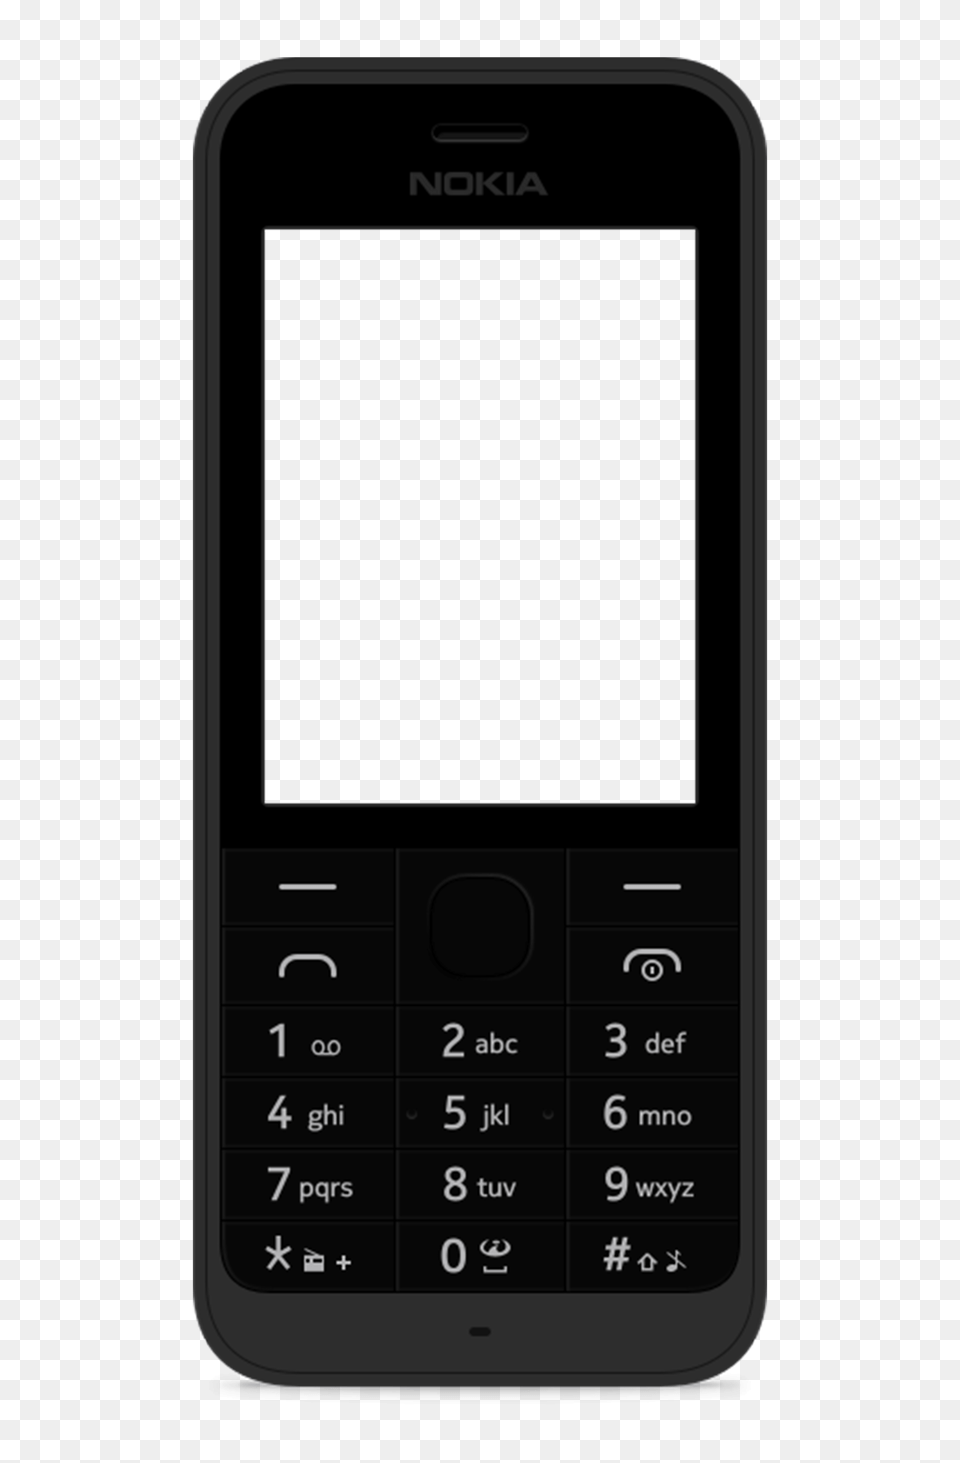 Nokia Mobile Phone, Electronics, Mobile Phone, Texting Png Image